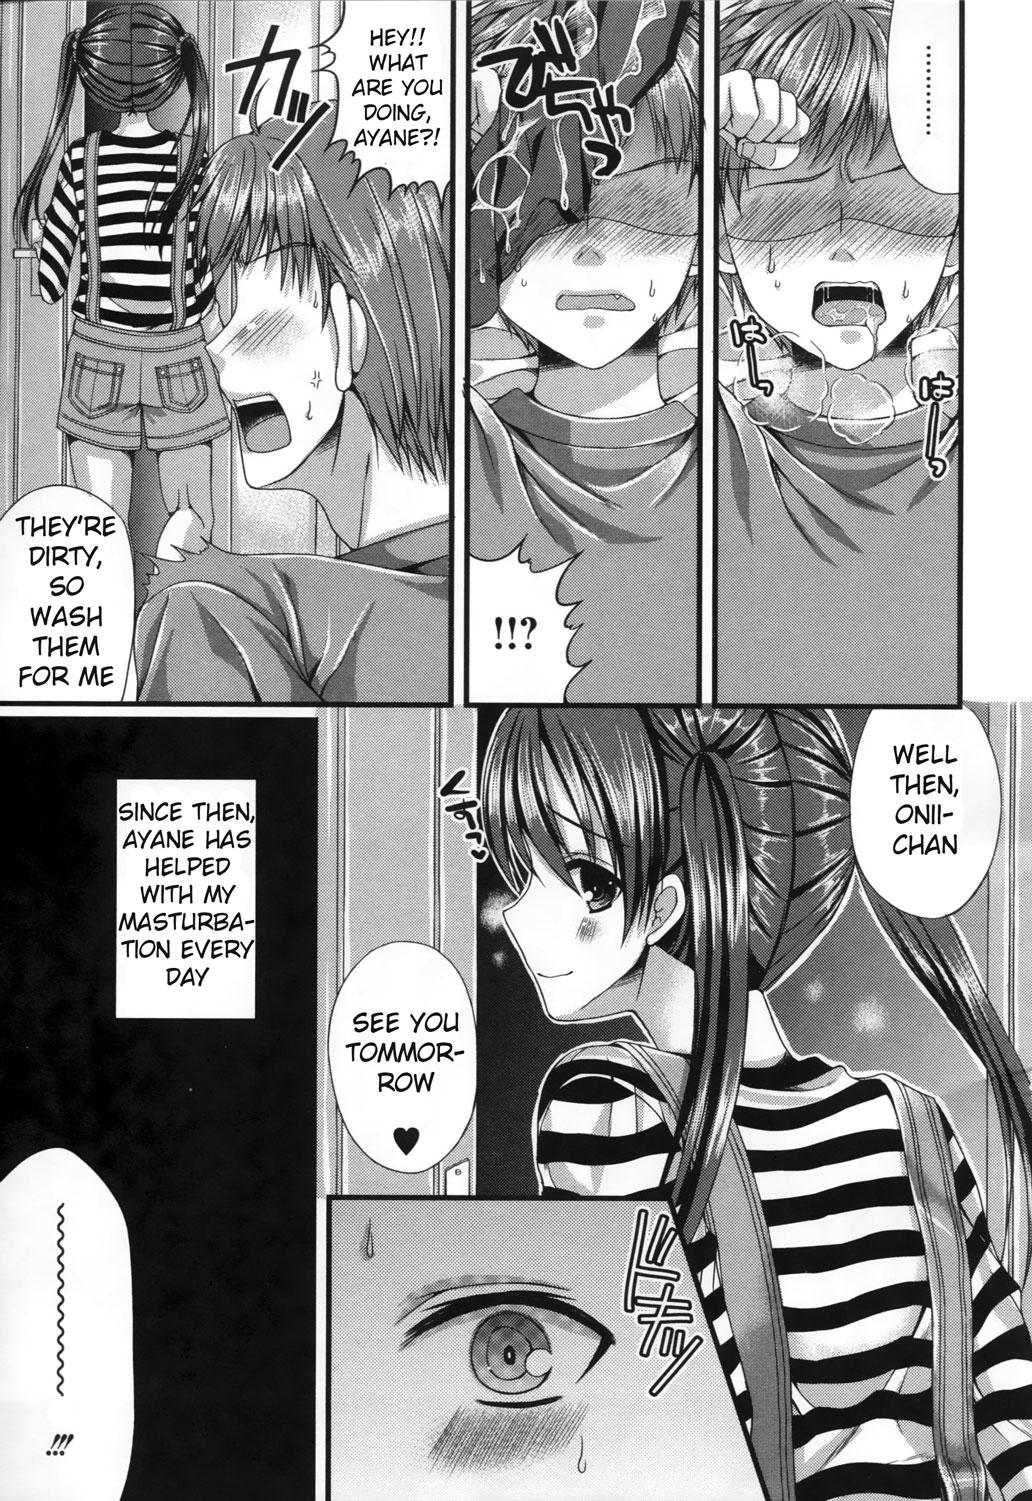 Calle Onii-chan training diary Cocksuckers - Page 7